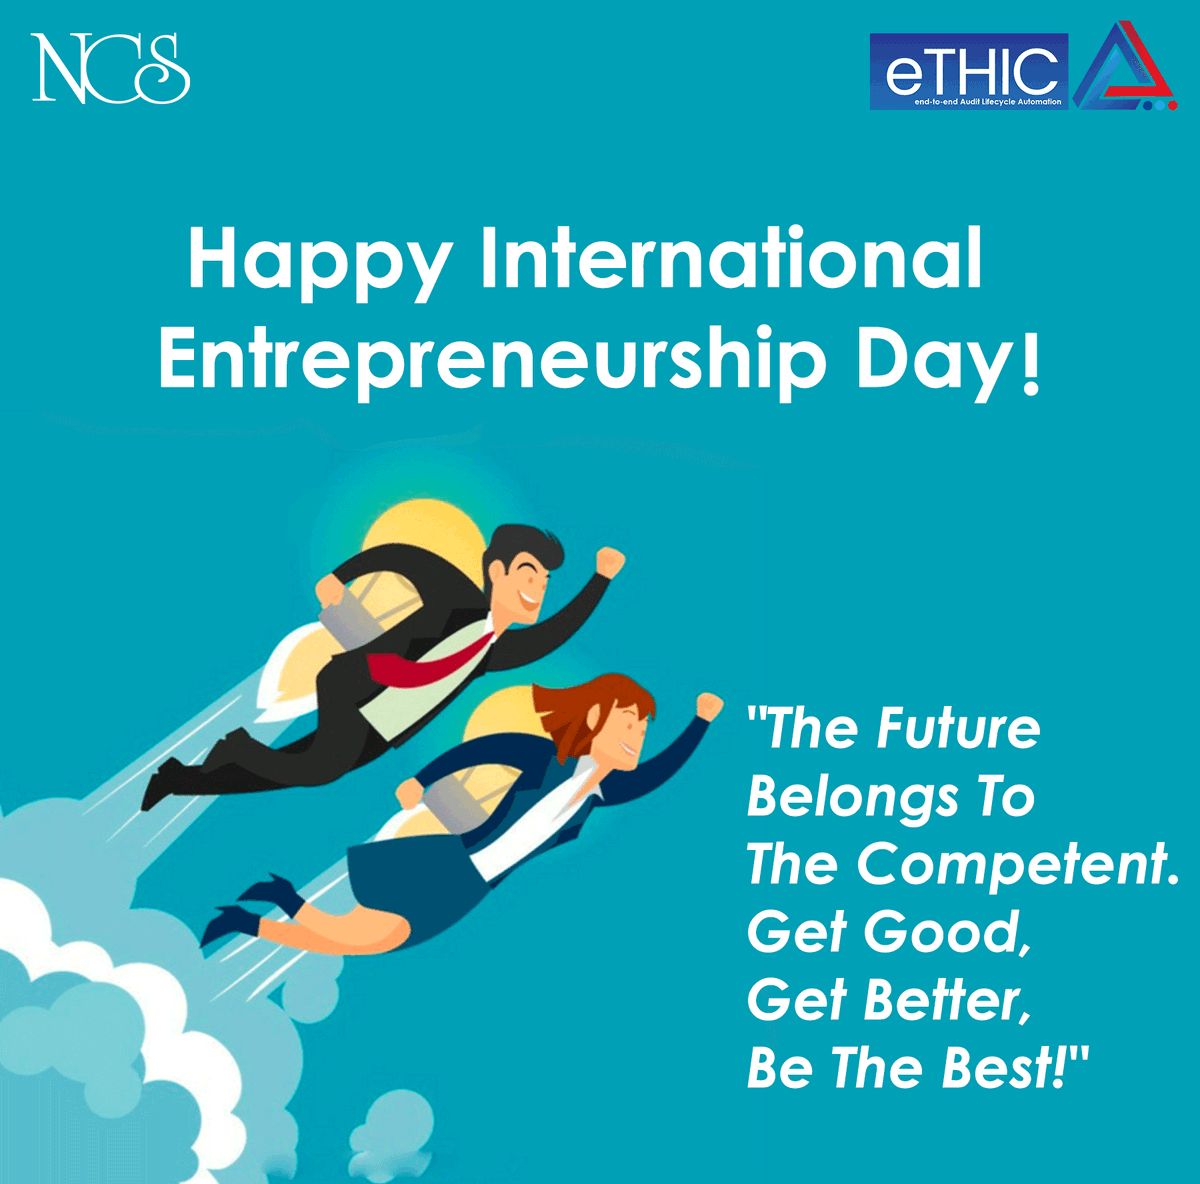 NCS Wishes you all a Very Happy International Entrepreneurship Day!
#NCS #eTHIC #eTHICCAAM #enterpreneurshipday #enterpreneur #BusinessGrowth #auditautomated #auditsoftware #LFAR #auditautomated #auditforinsurance